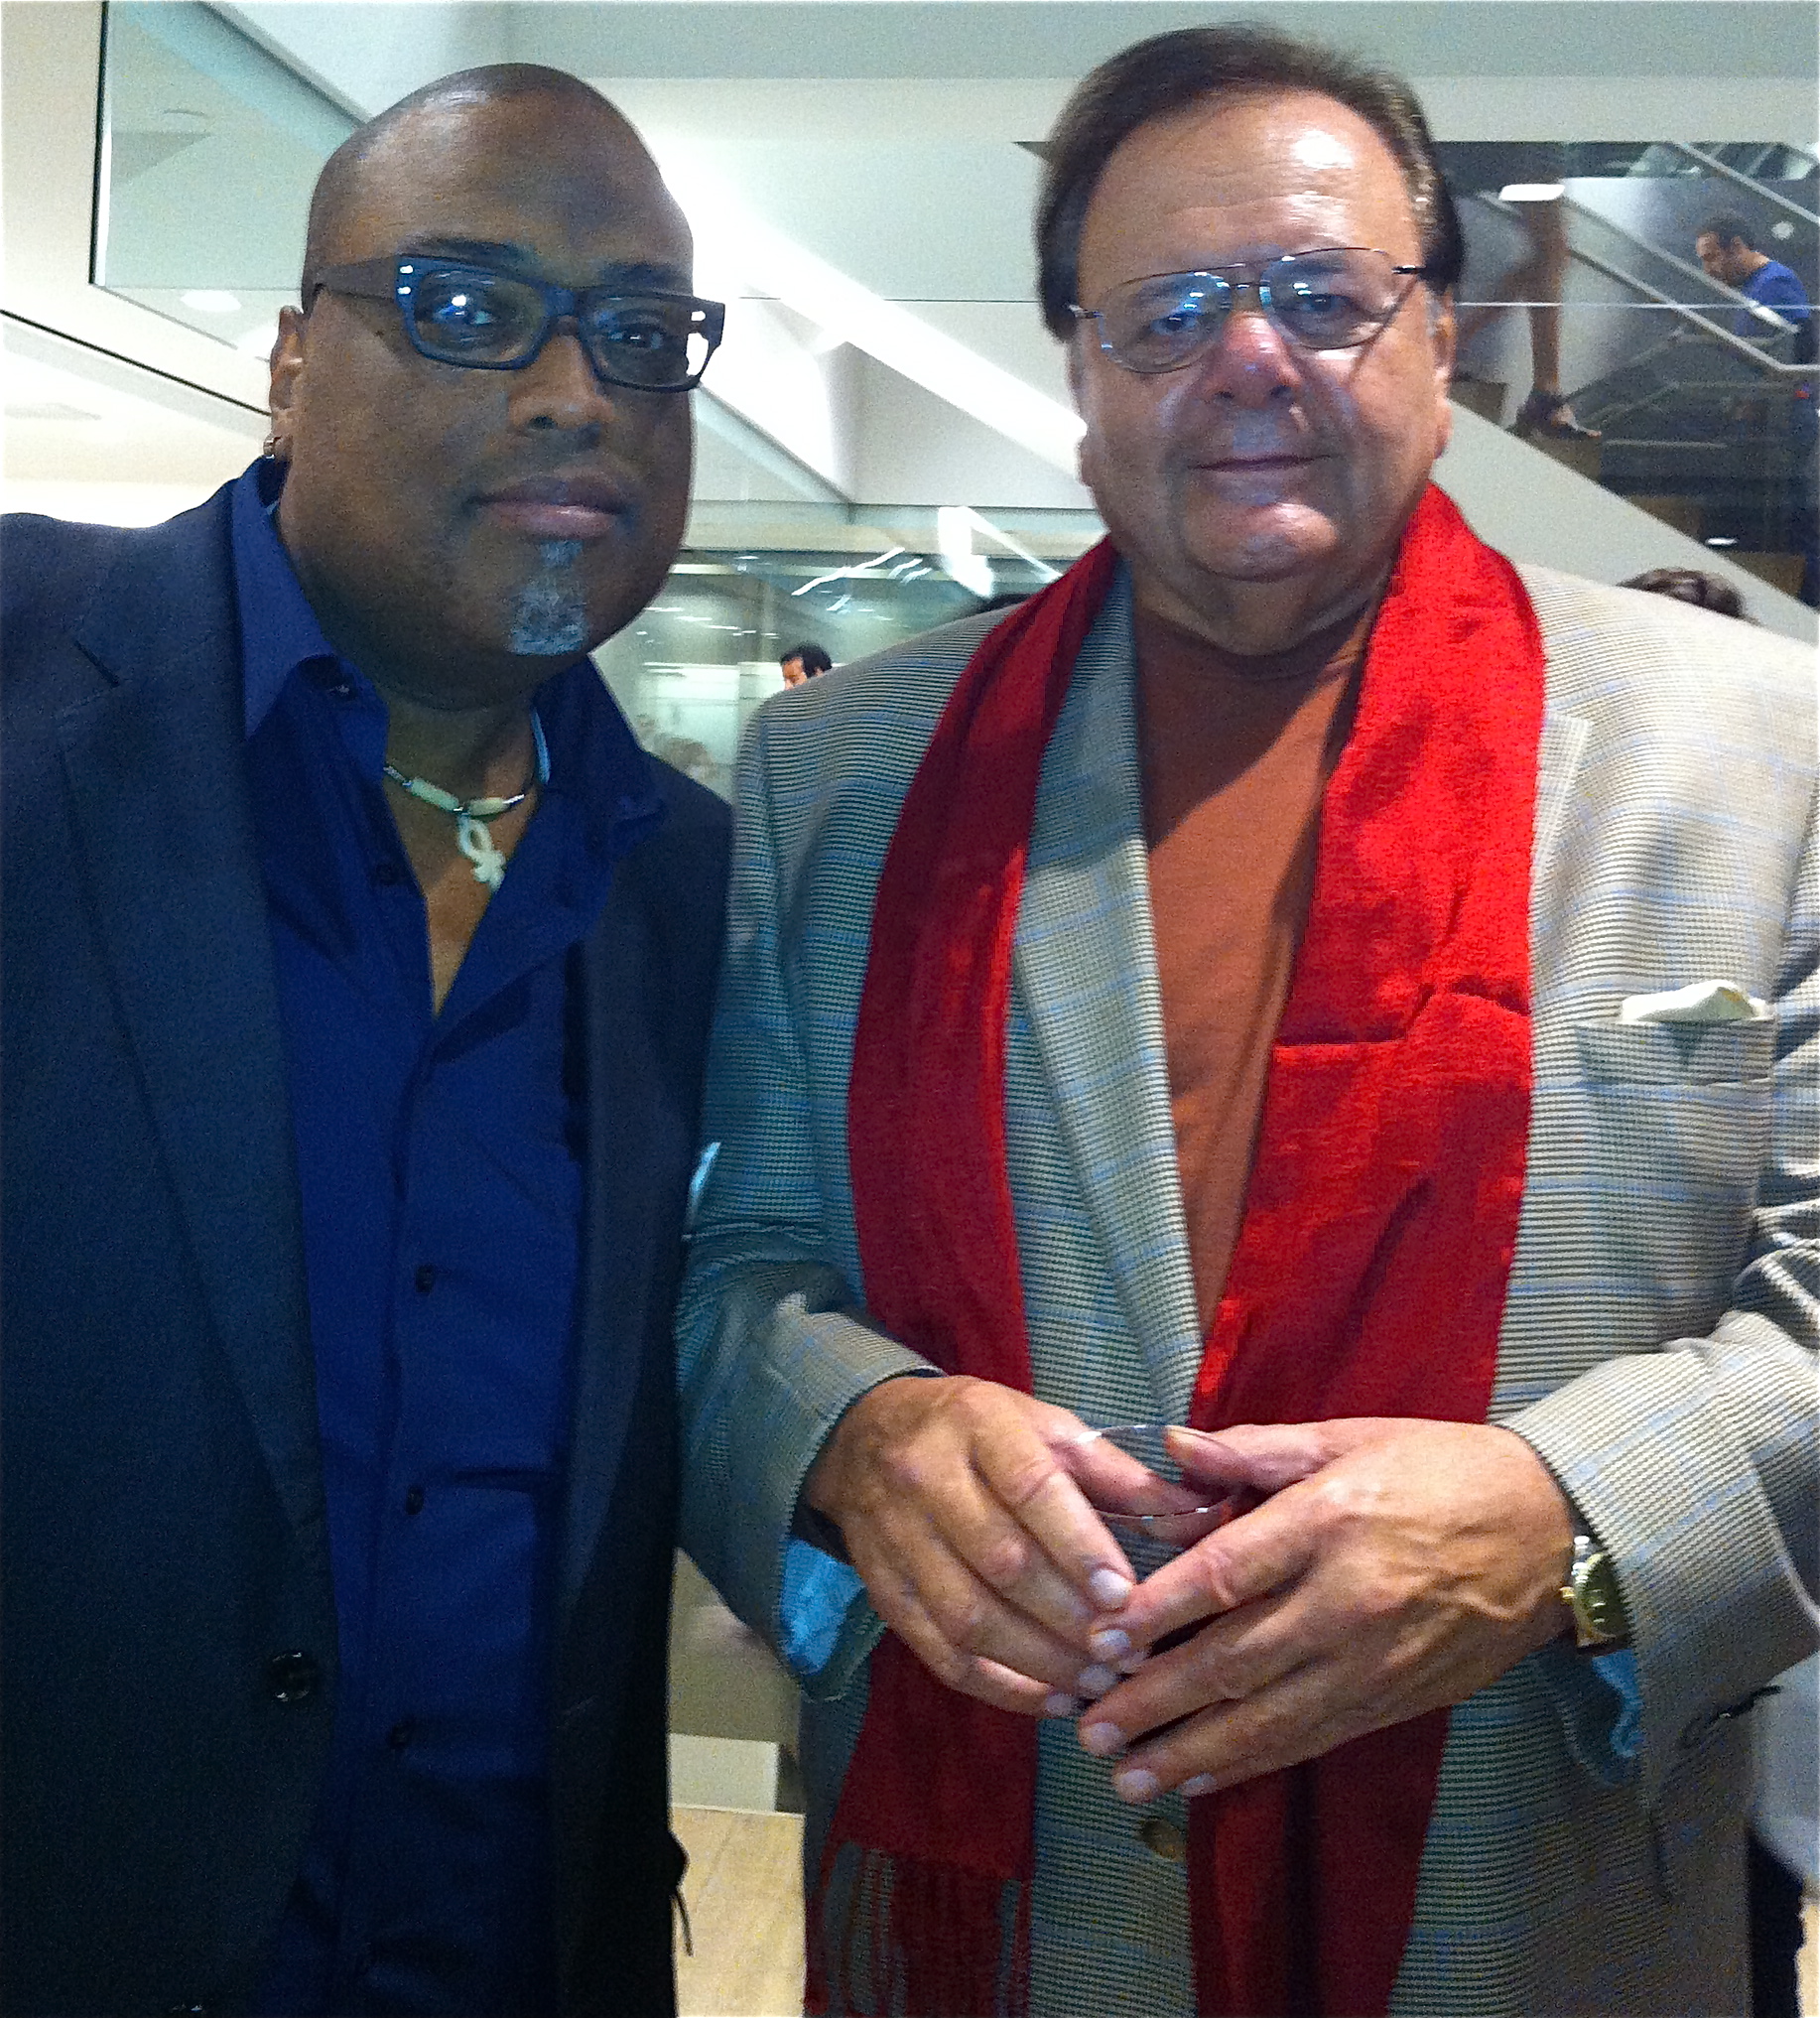 Gregor Manns with Paul Sorvino at the premiere screening of, 